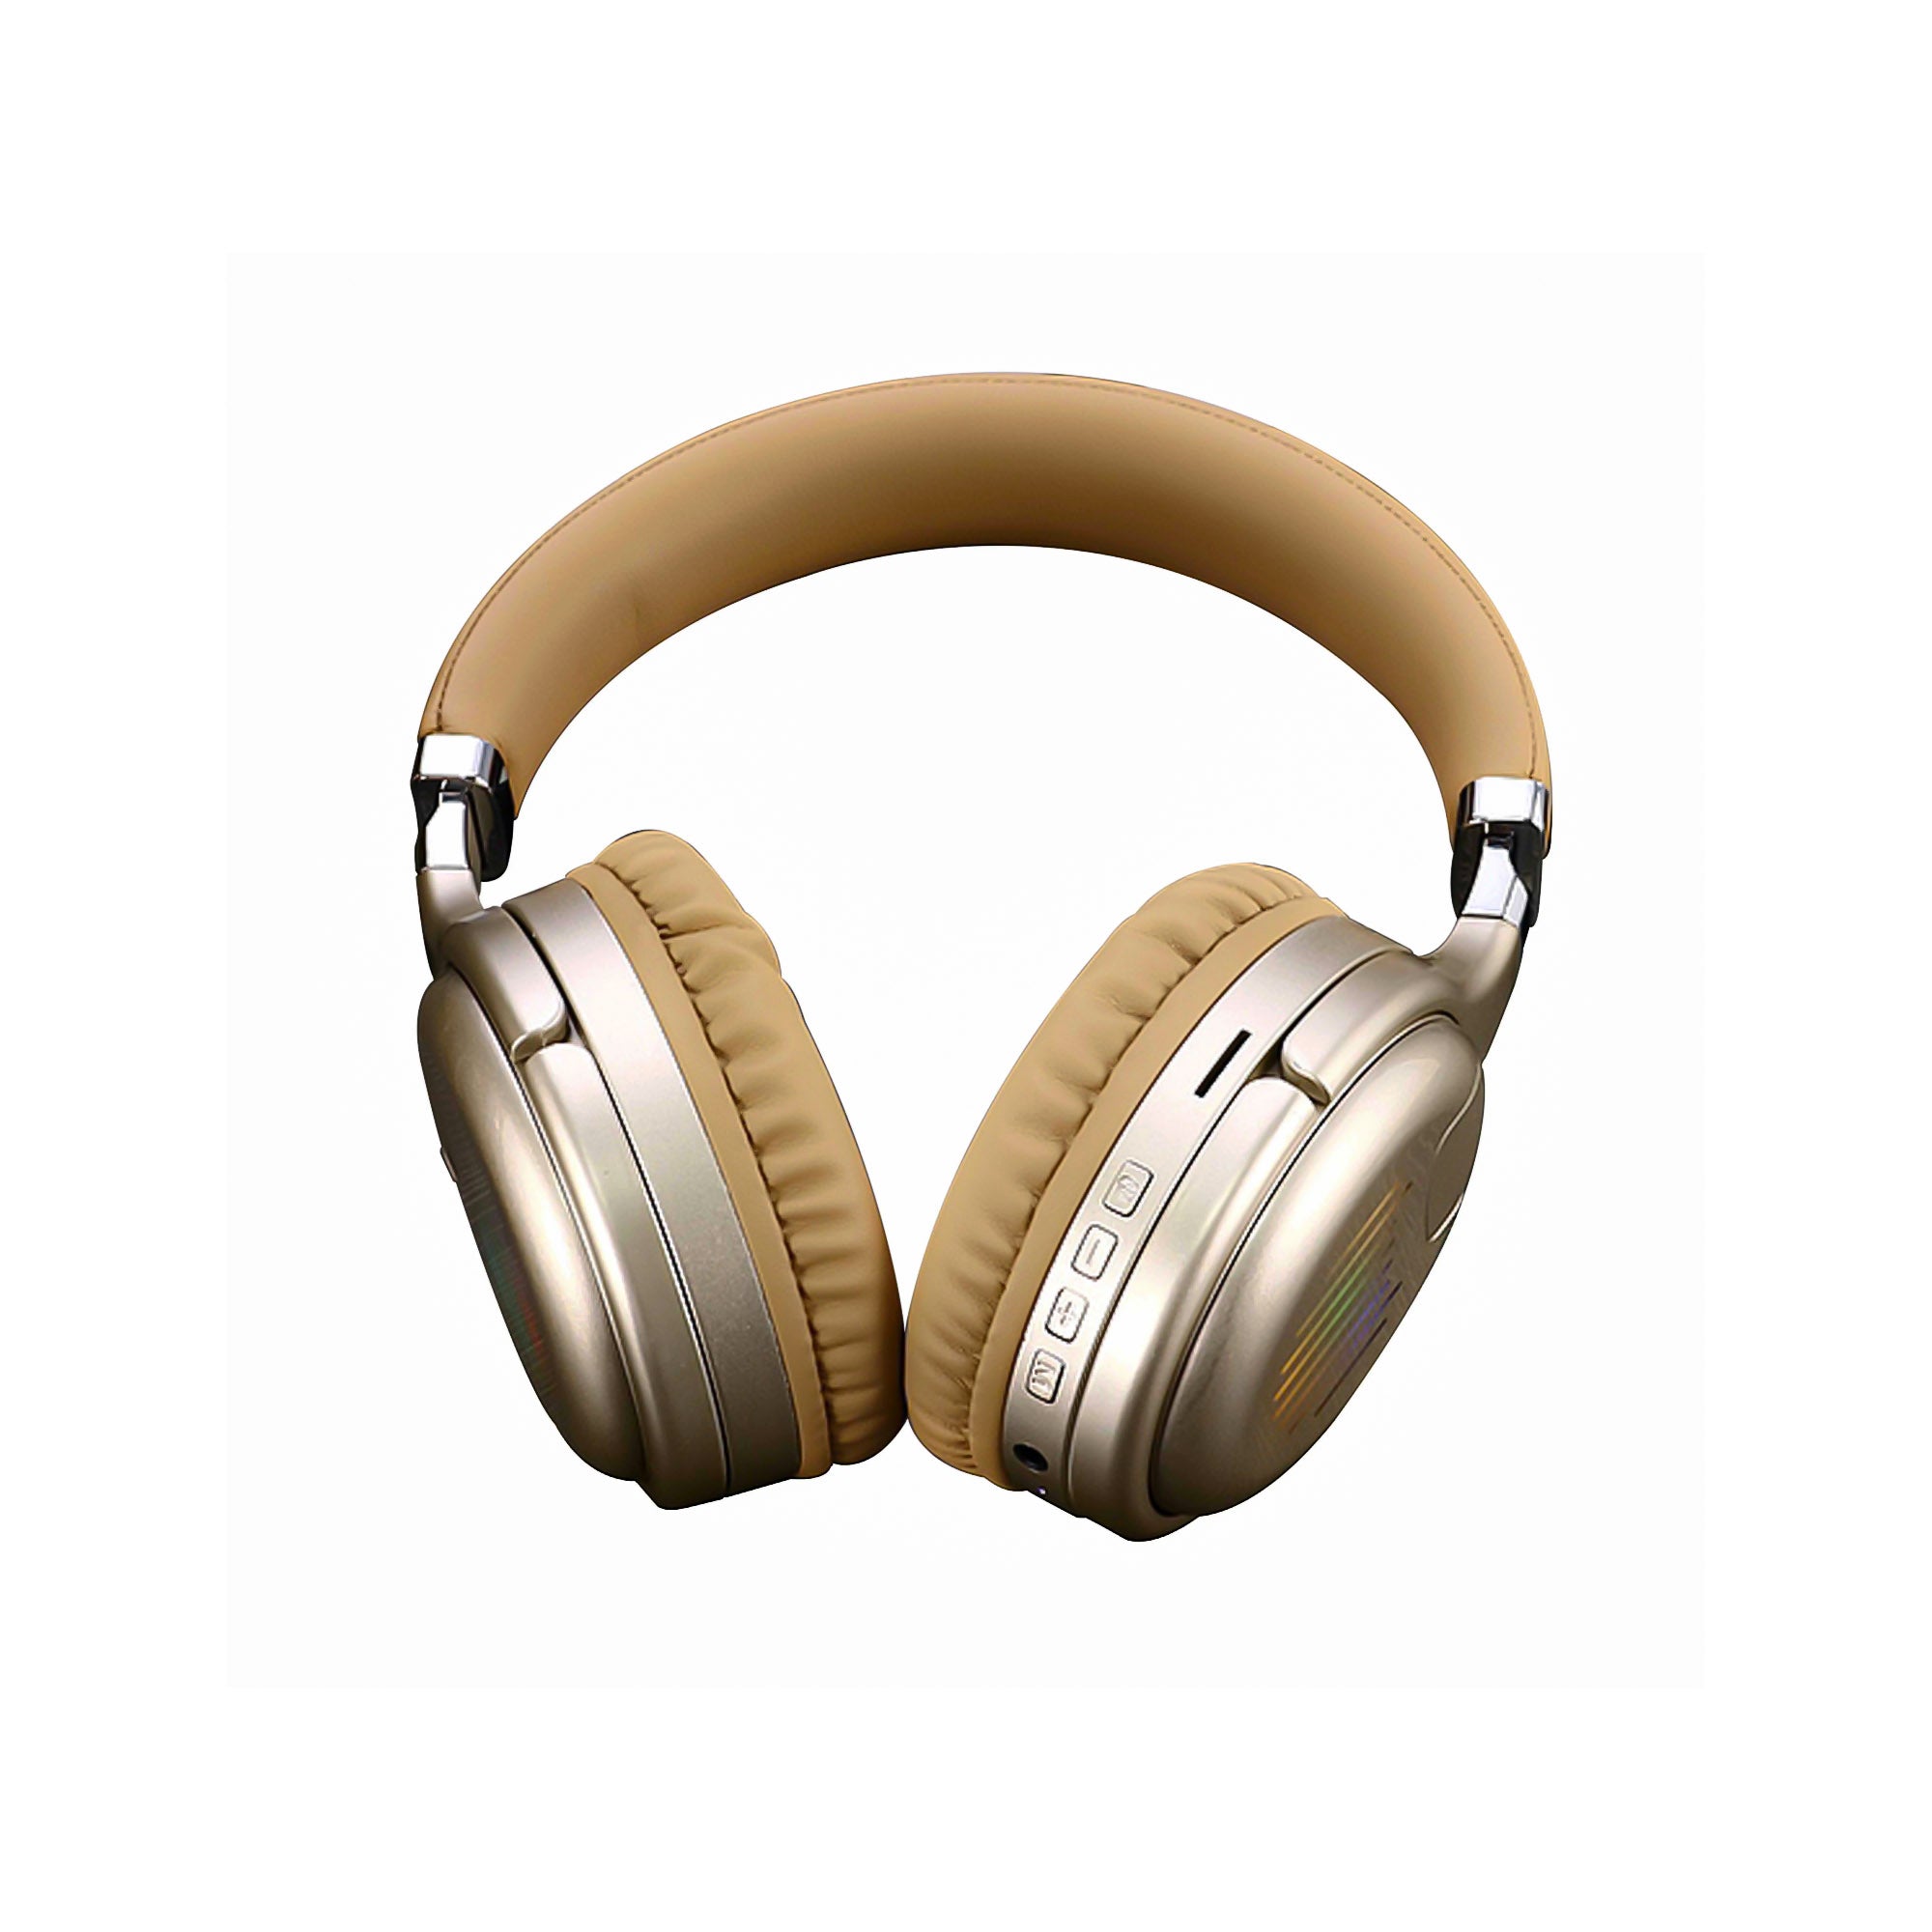 Ultra realistic boosted sound quality foldable bluetooth headphone